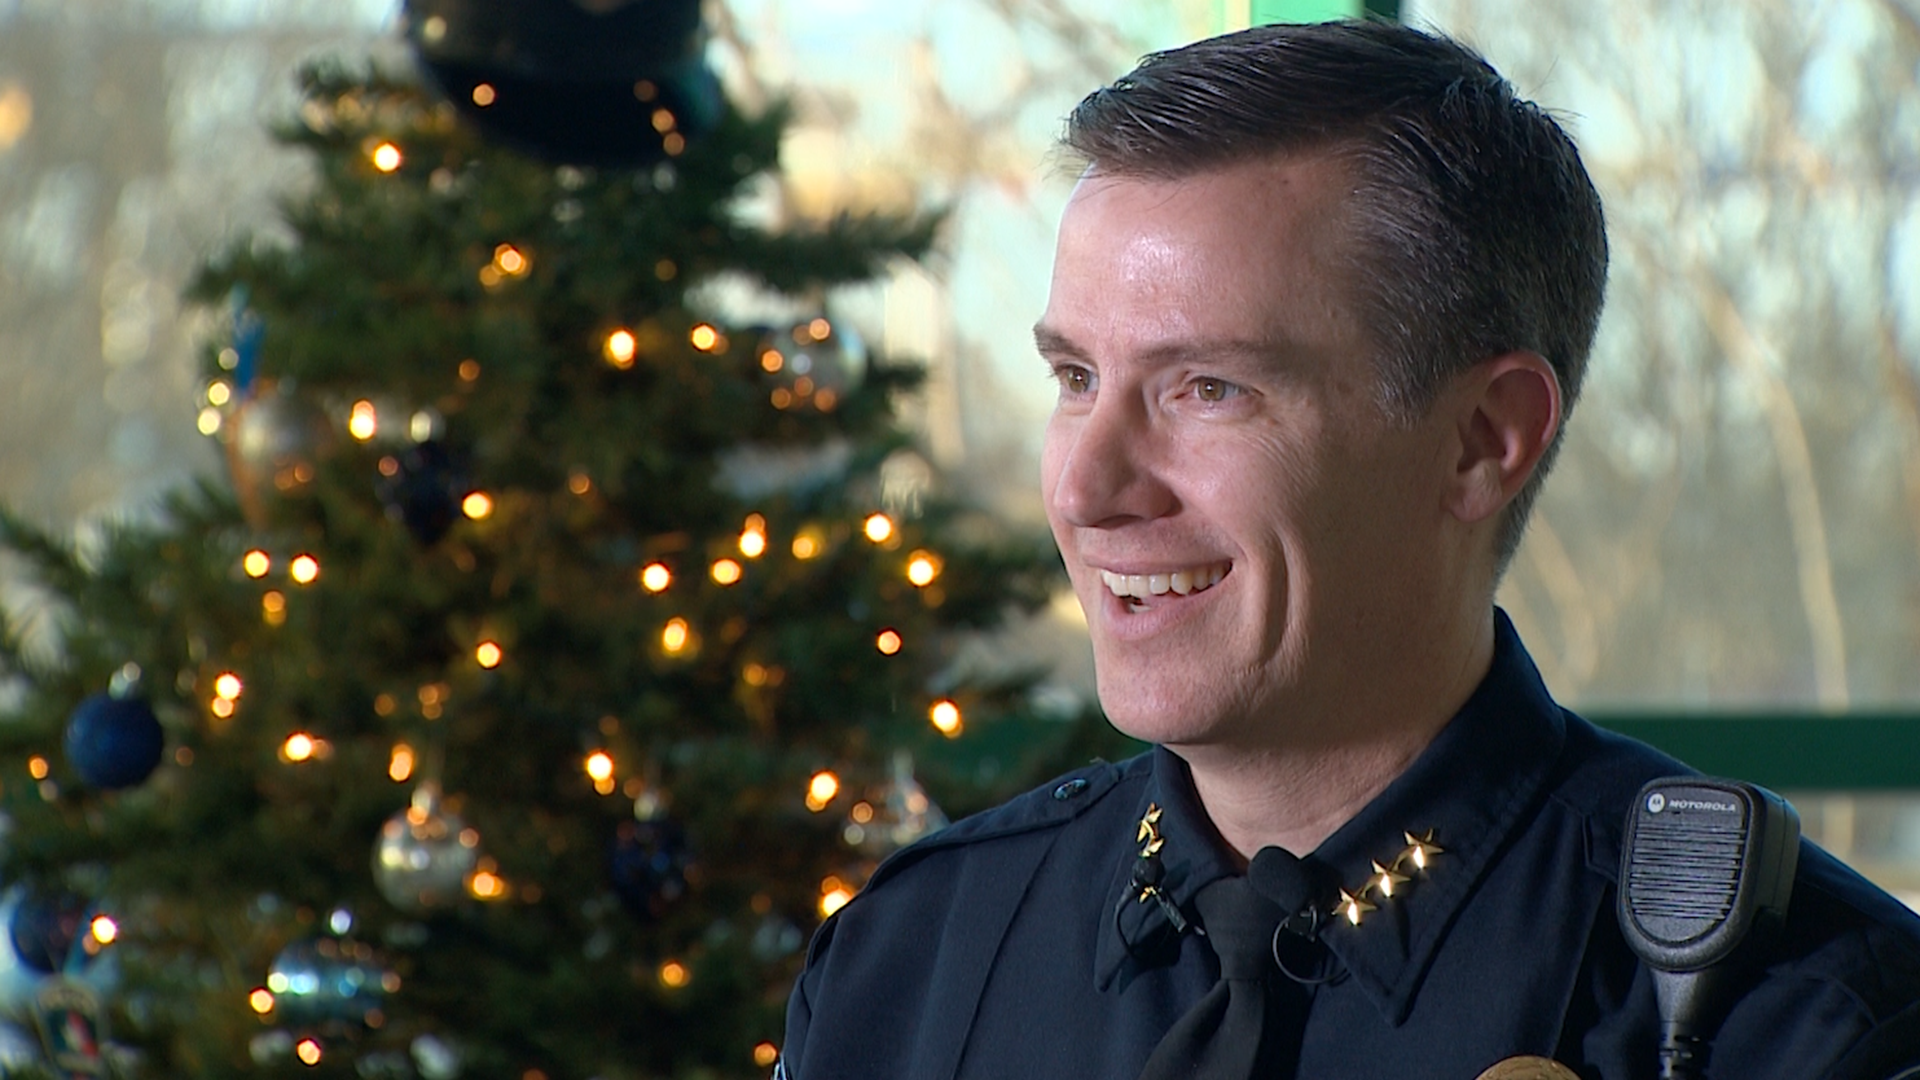 This Christmas, the chief wanted to give one of his dedicated officers a special gift. The chief worked one of his officers' shifts for a day.